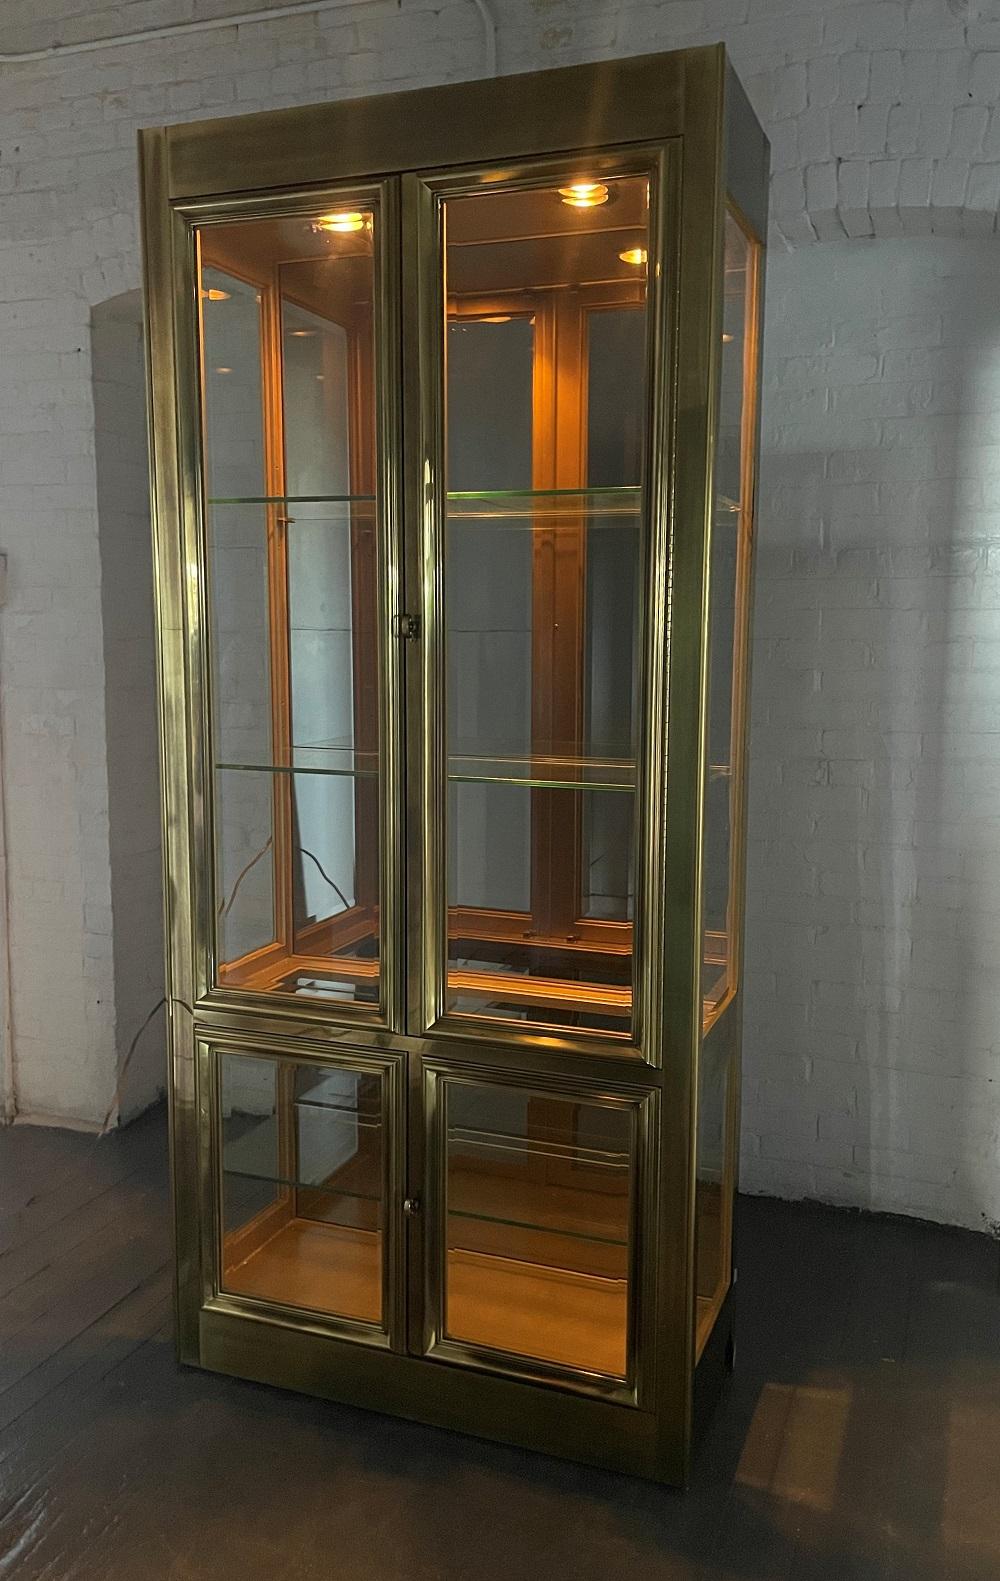 Brass mastercraft display cabinet. The cabinet has glass shelves and lights up inside from top.